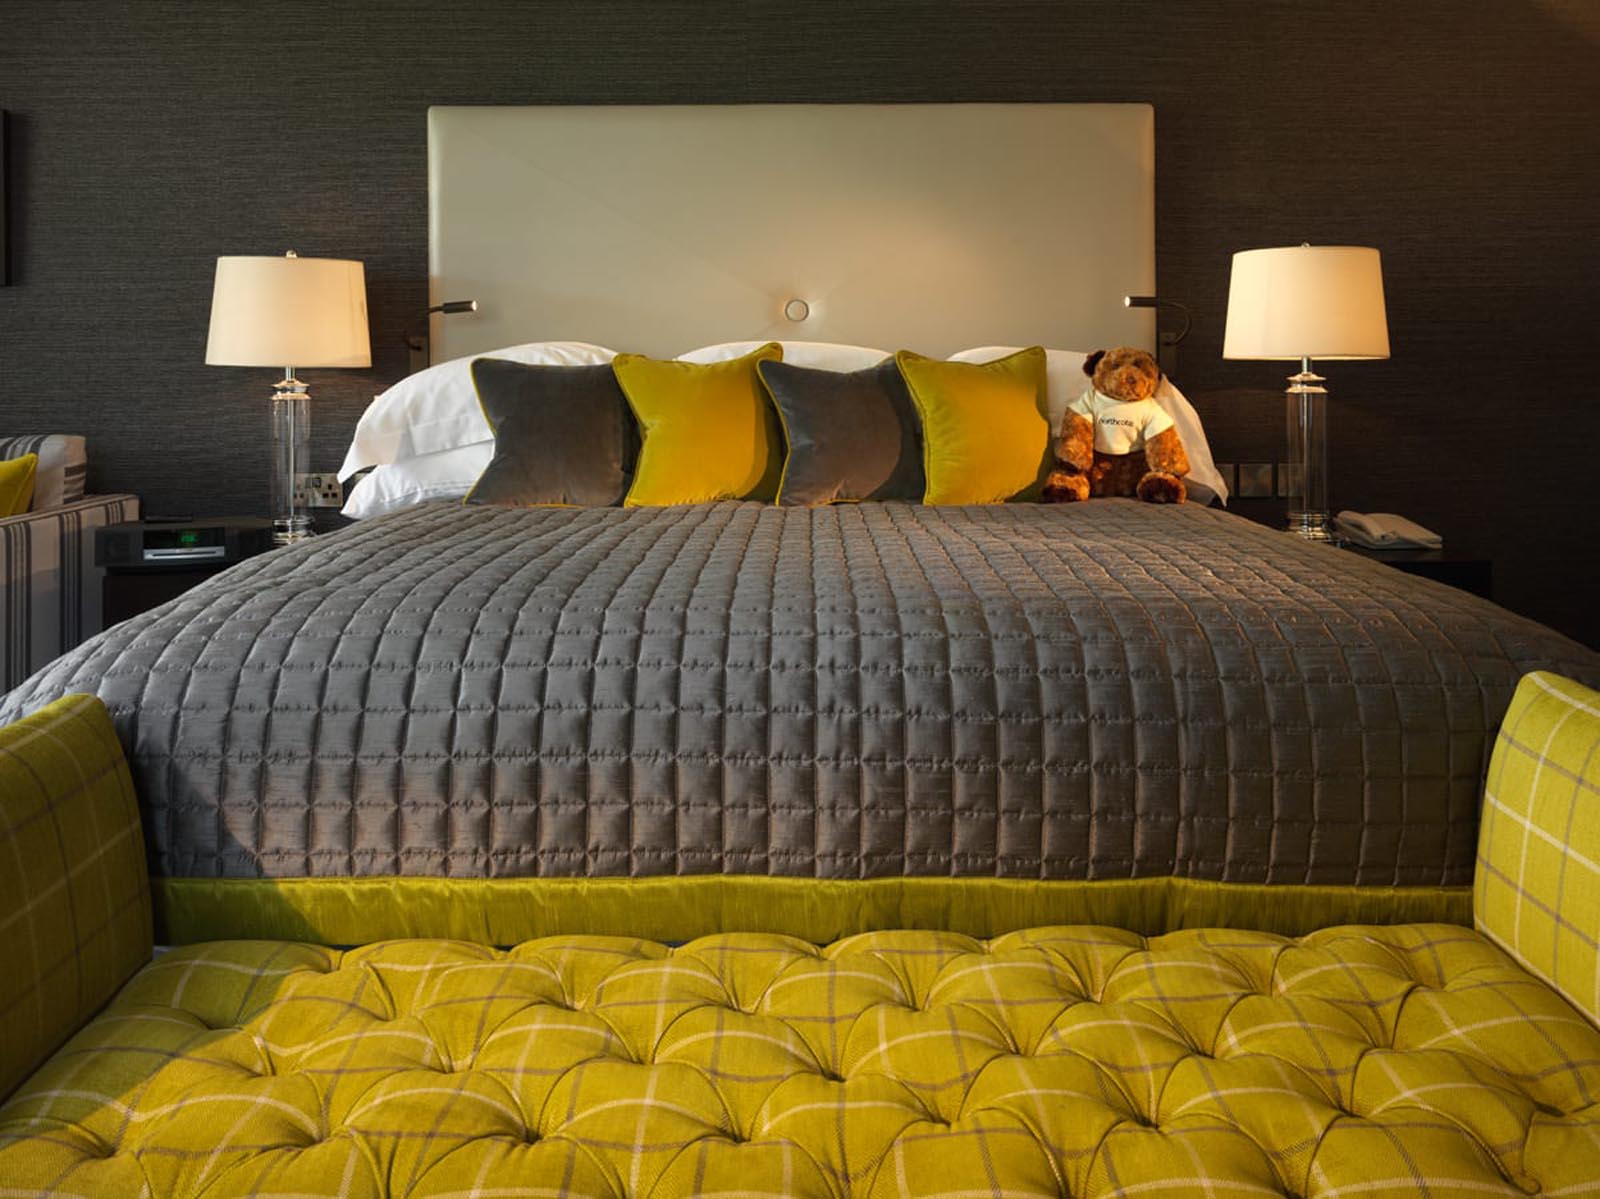 One of our deluxe rooms, a large double bed with seating at the bottom of the bed